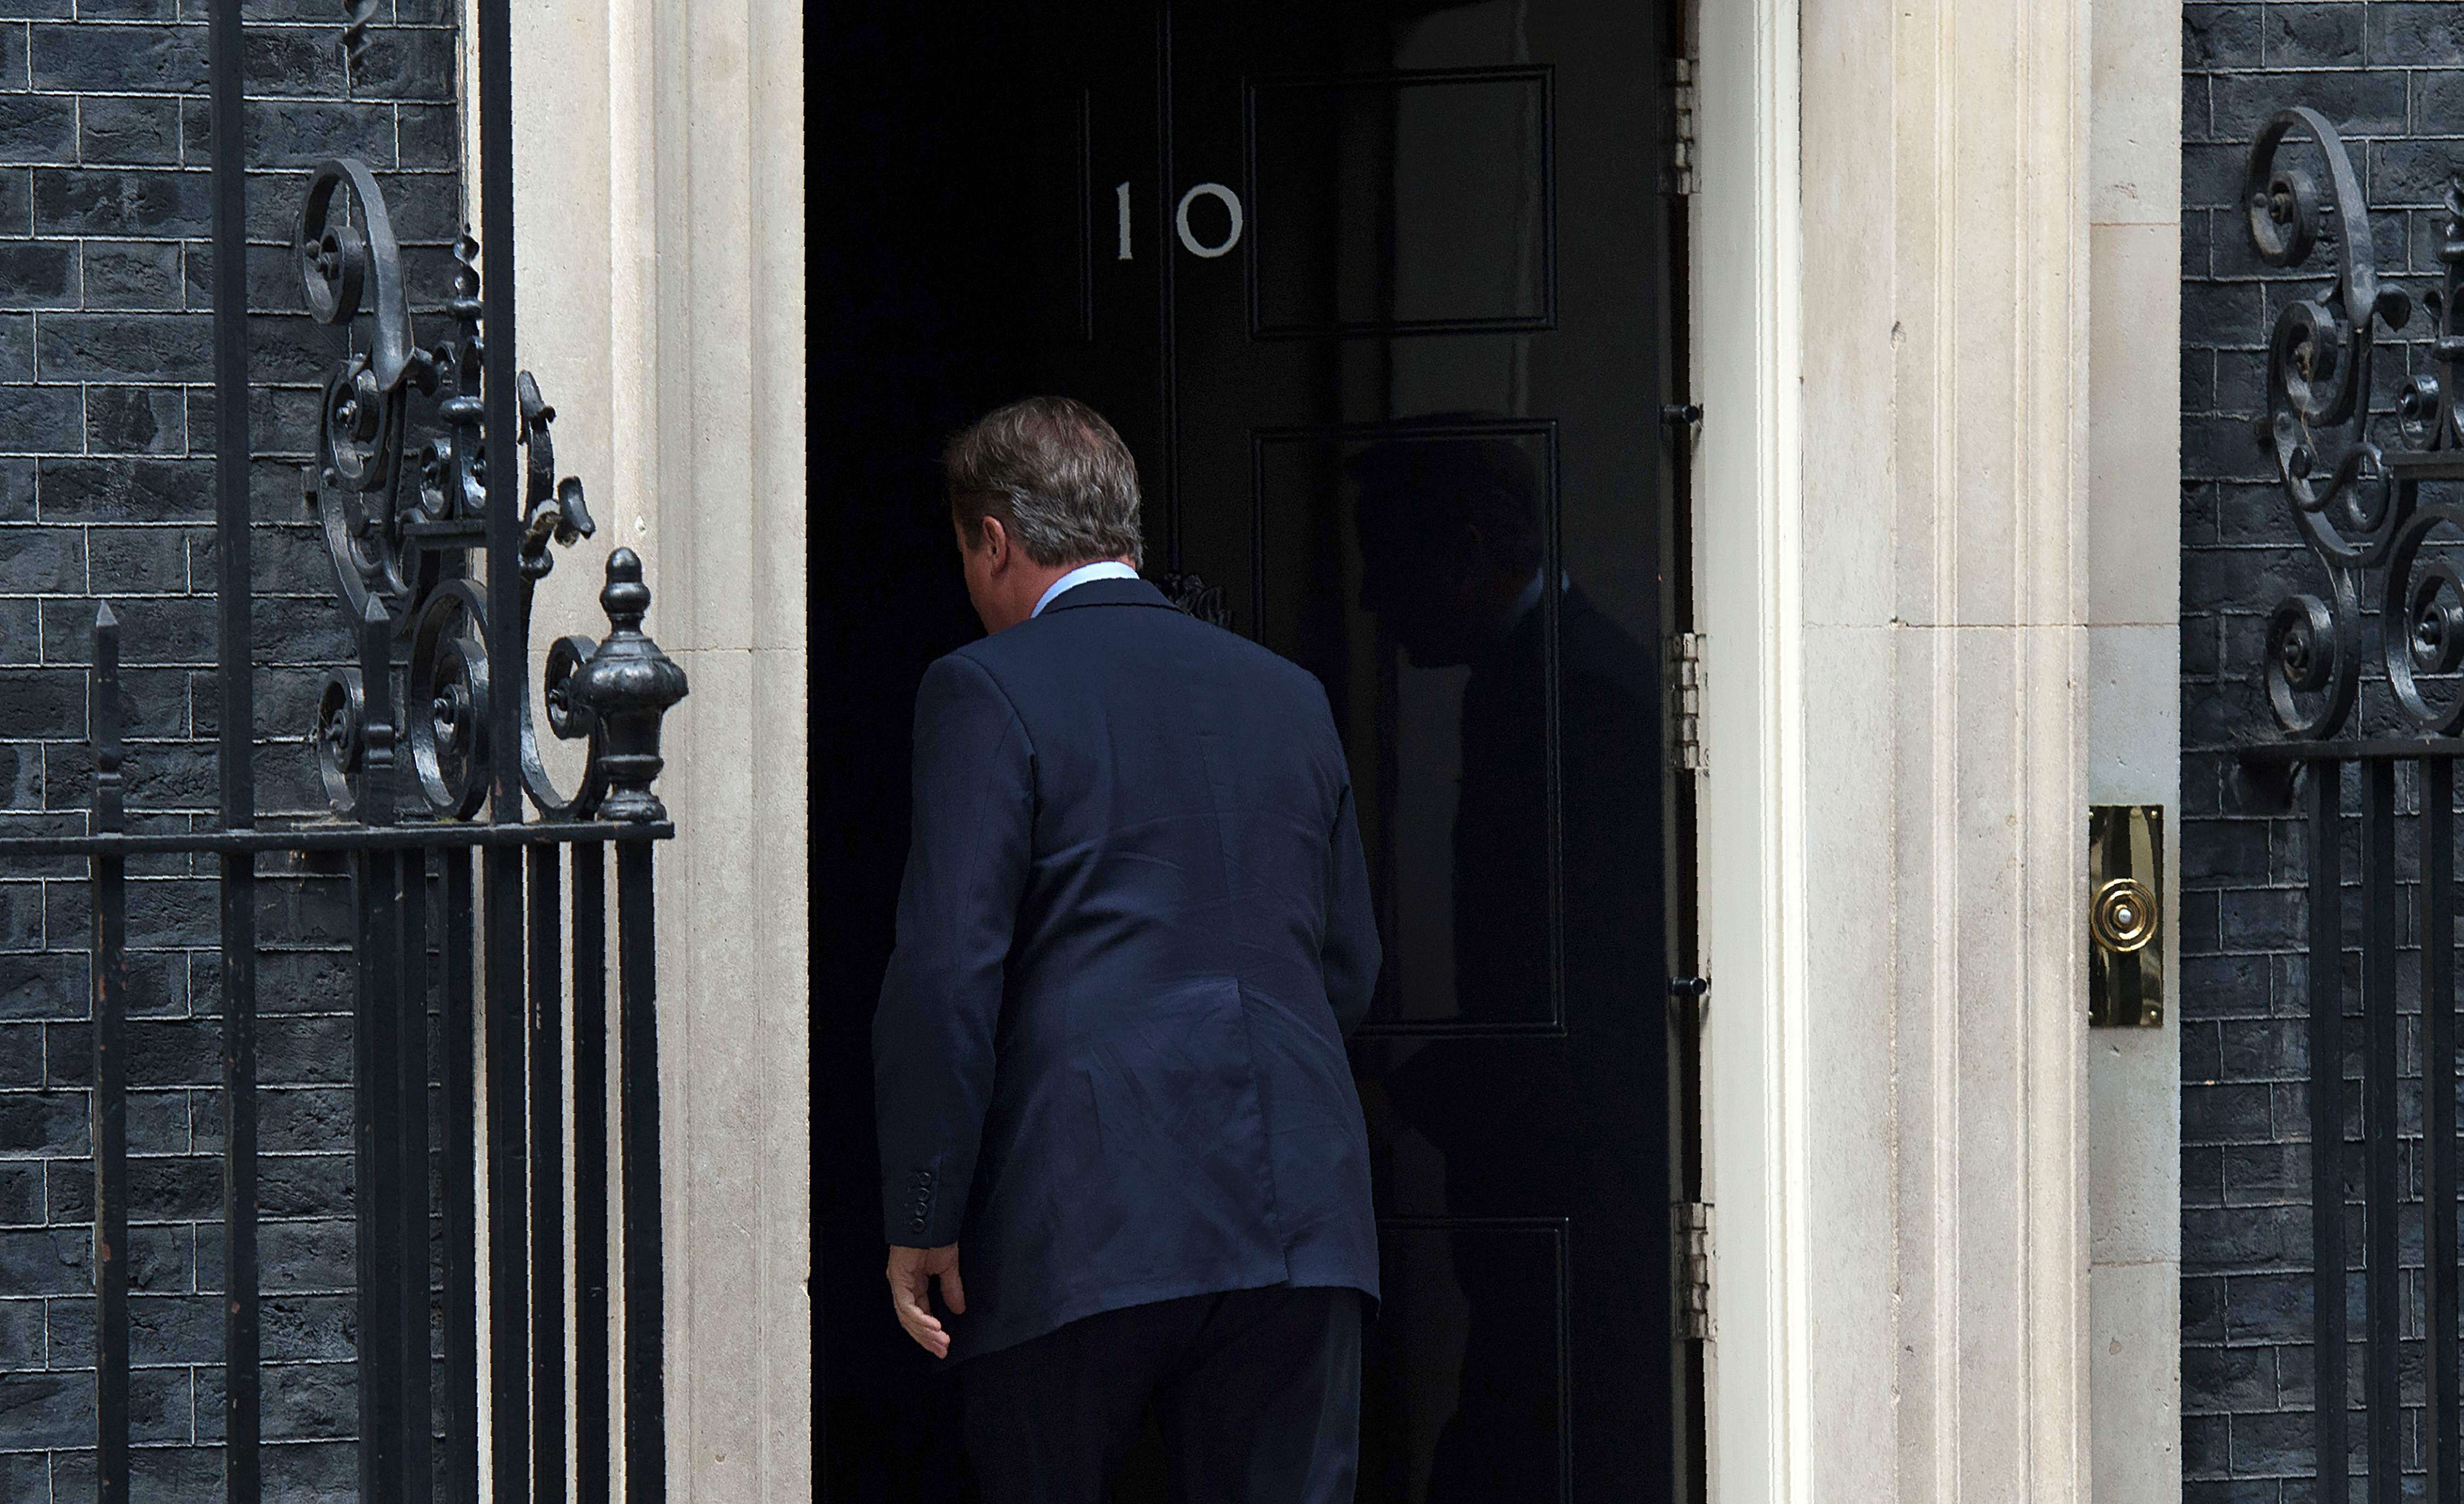 David Cameron ultimately failed to offer the British people the leadership that was required. Photo: AFP